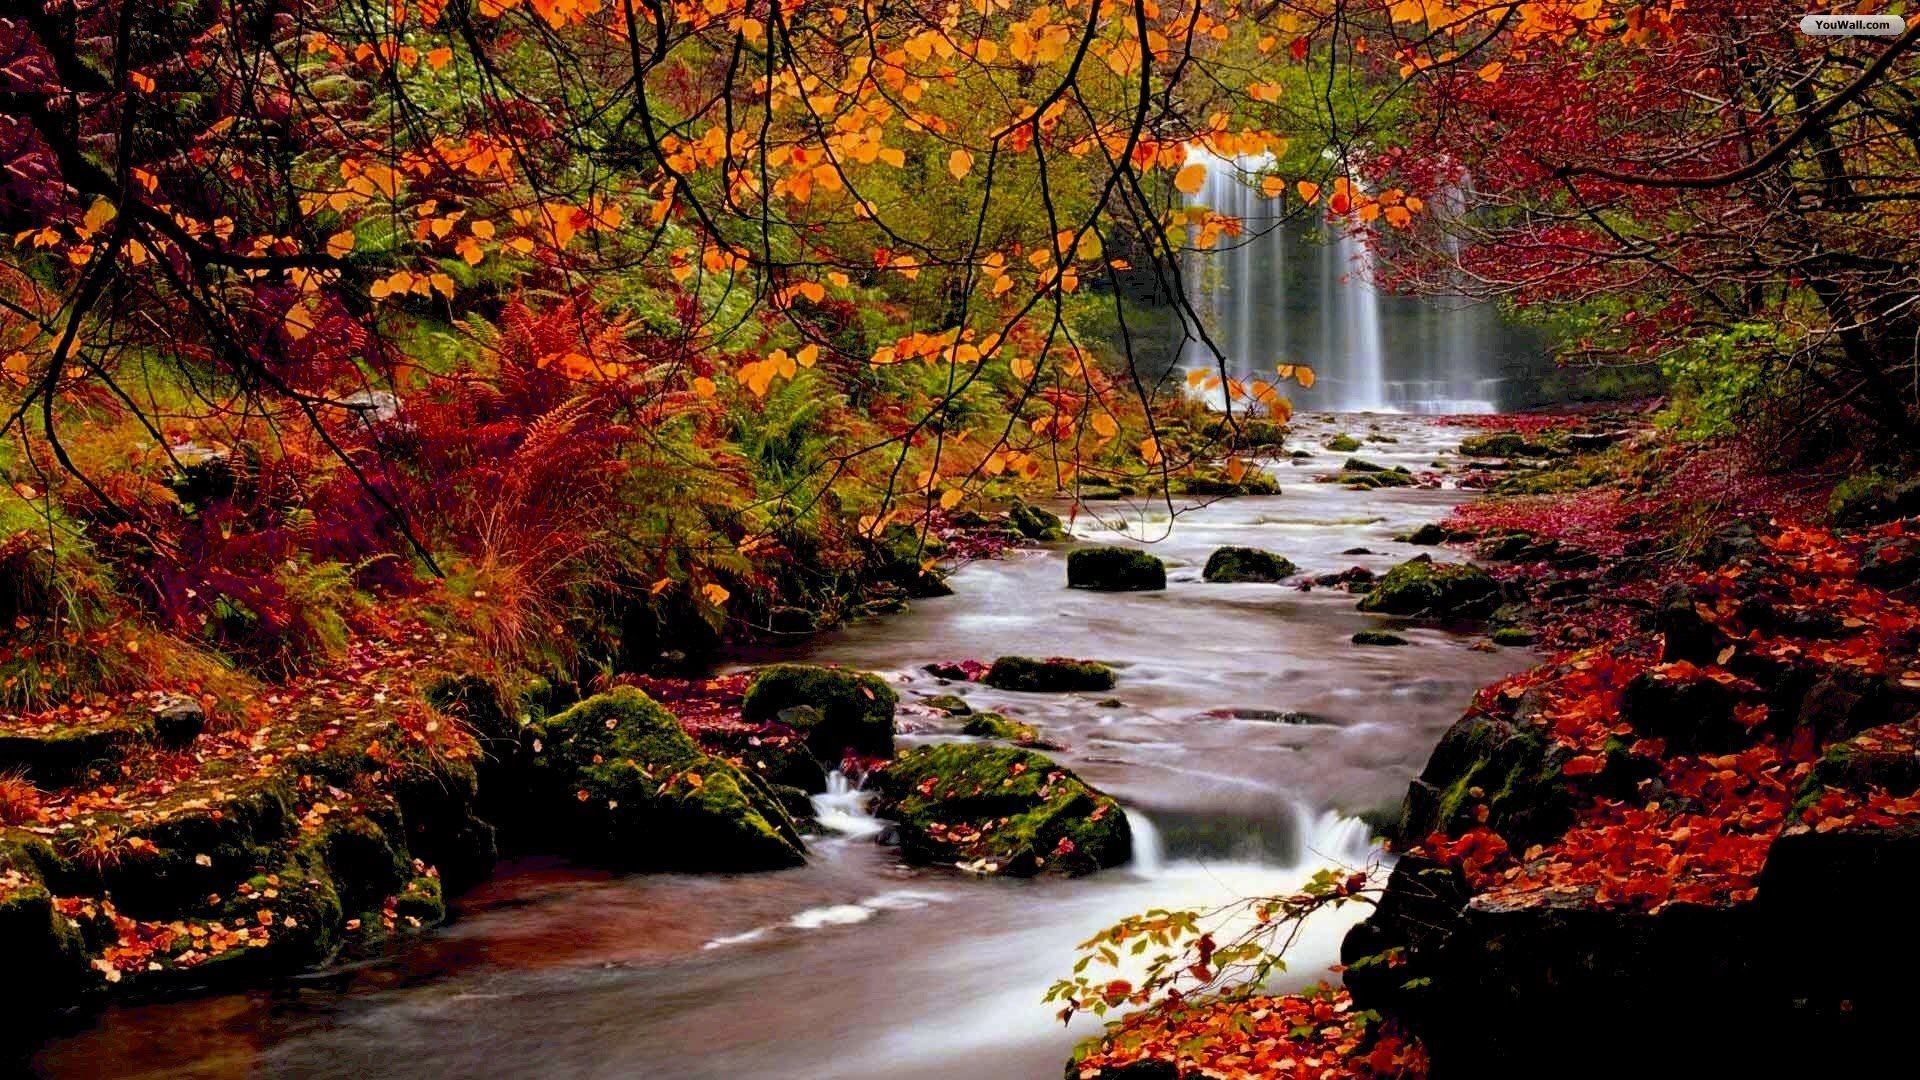 1920x1080 Fall images | YouWall - Autumn Forest Waterfall Wallpaper - wallpaper, wallpapers .